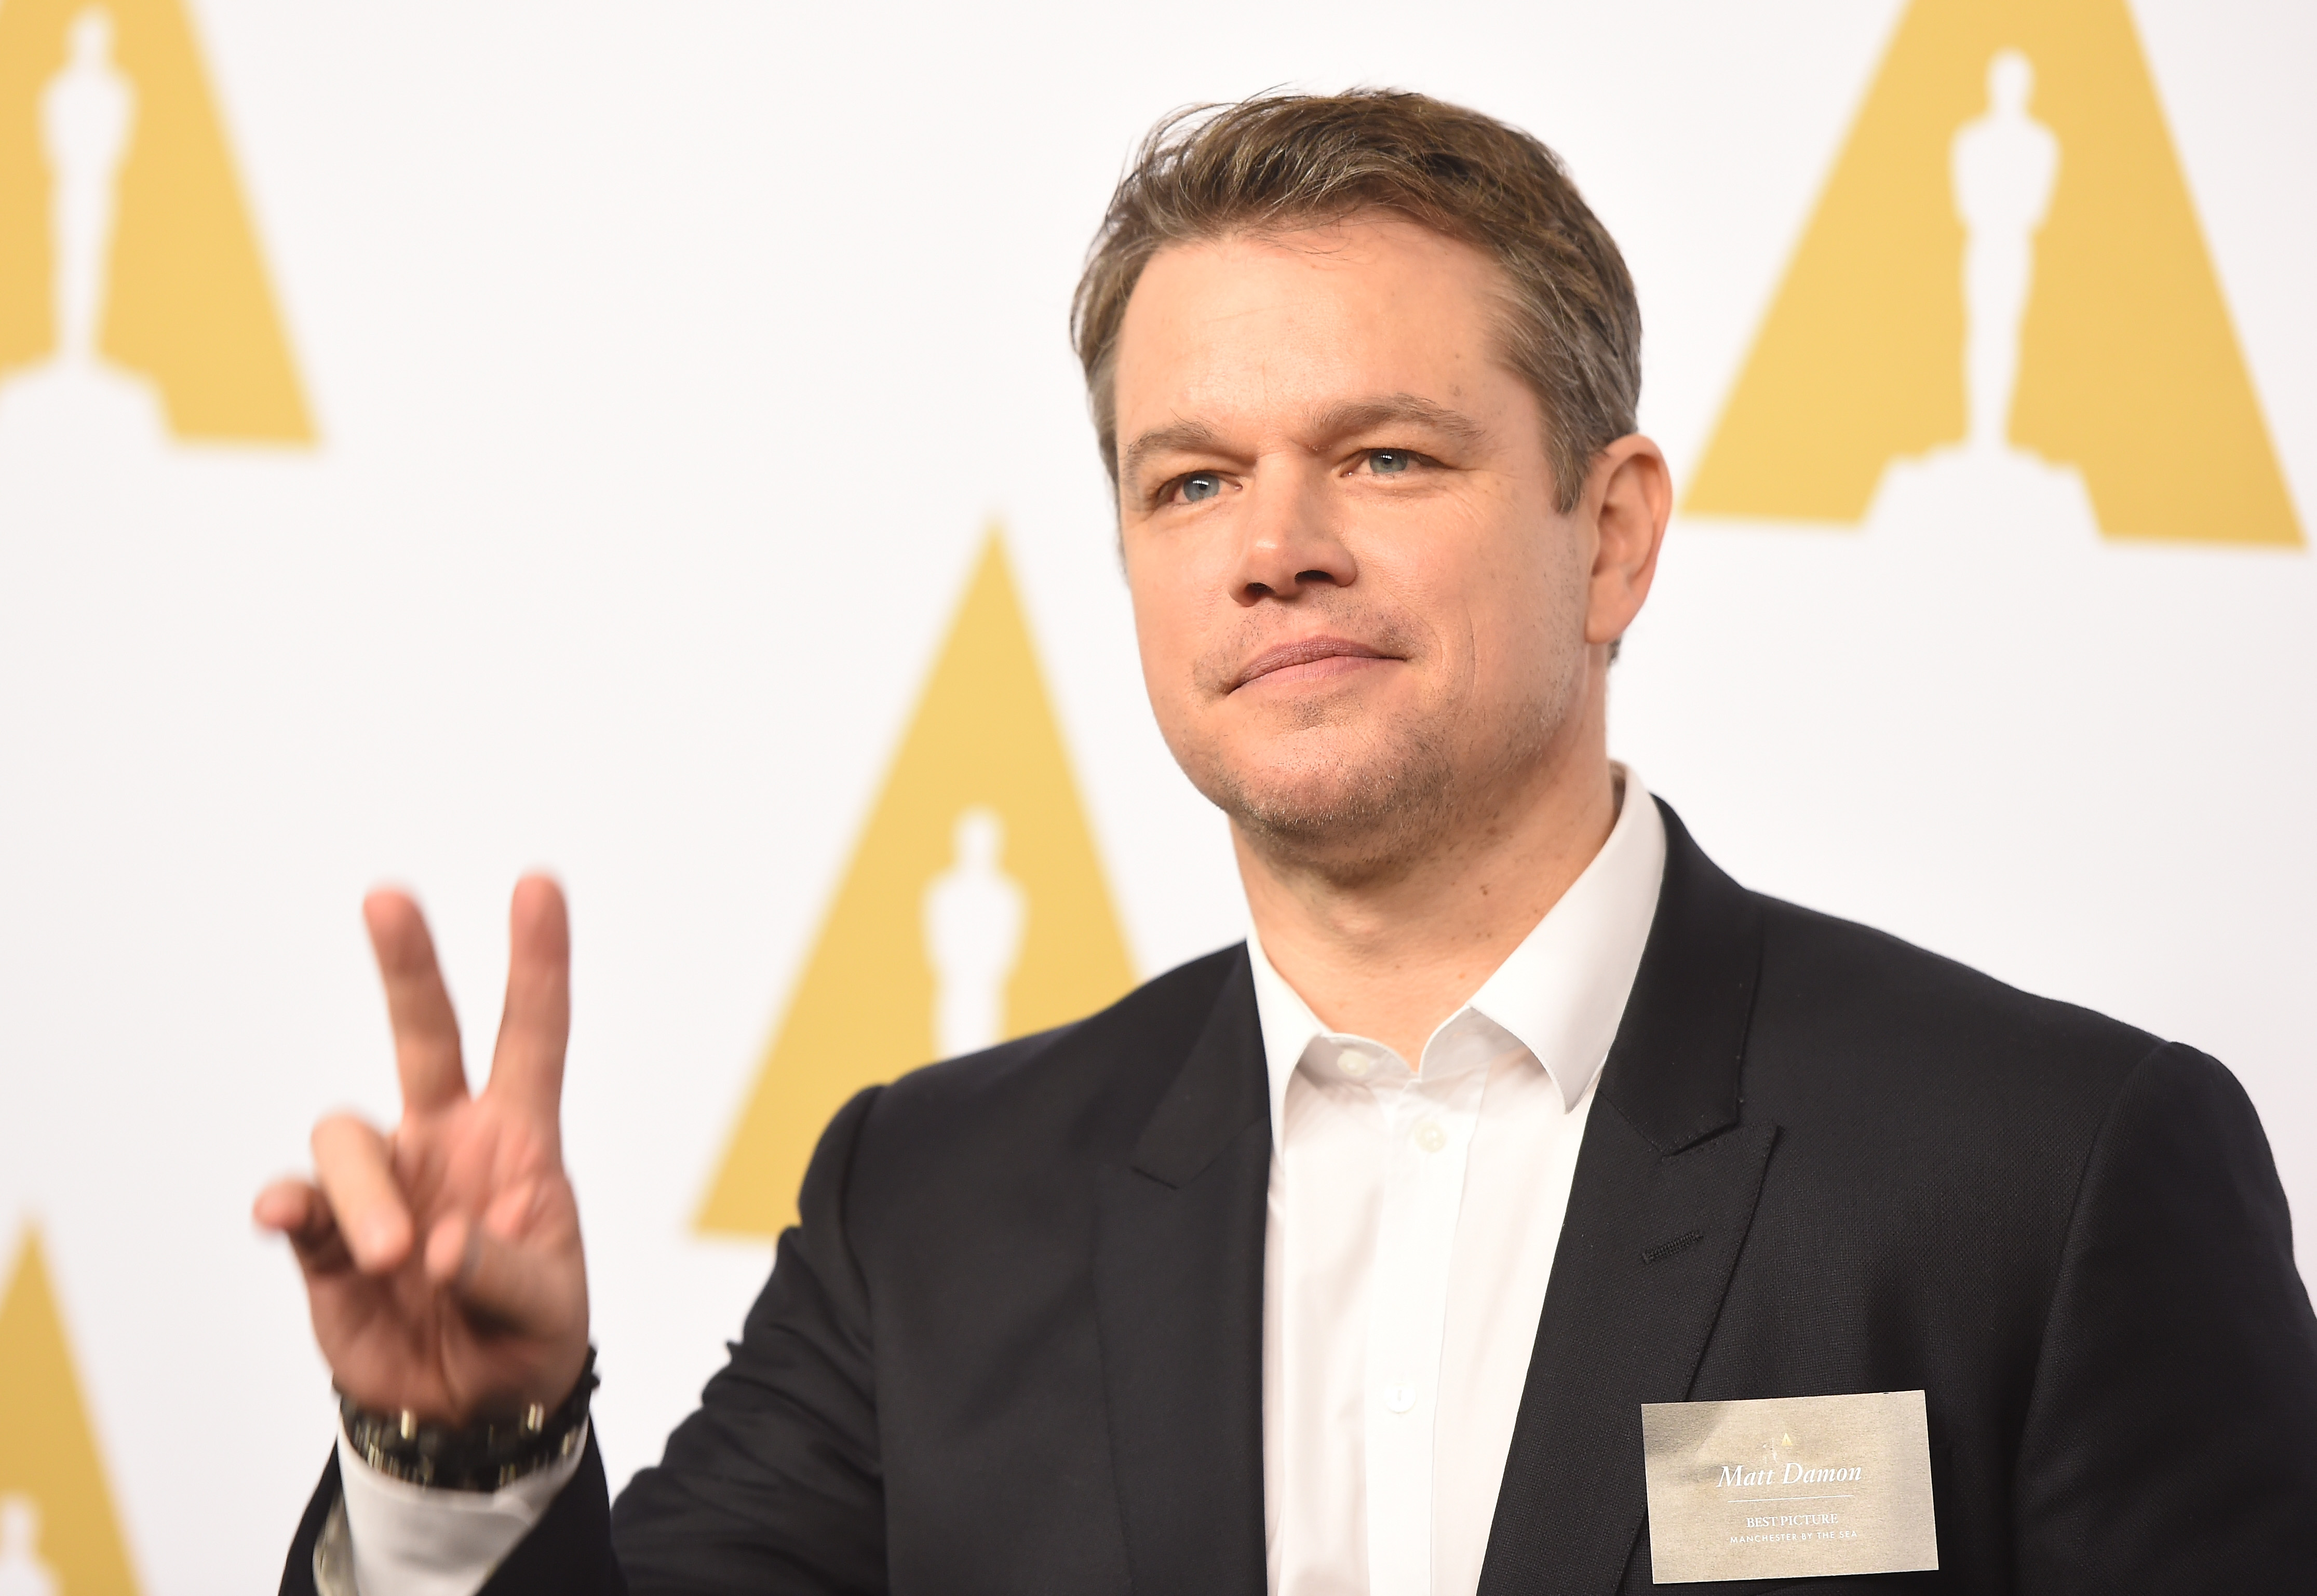 Matt Damon posing on red carpet with two fingers up at the 89th Annual Academy Awards Nominee Luncheon